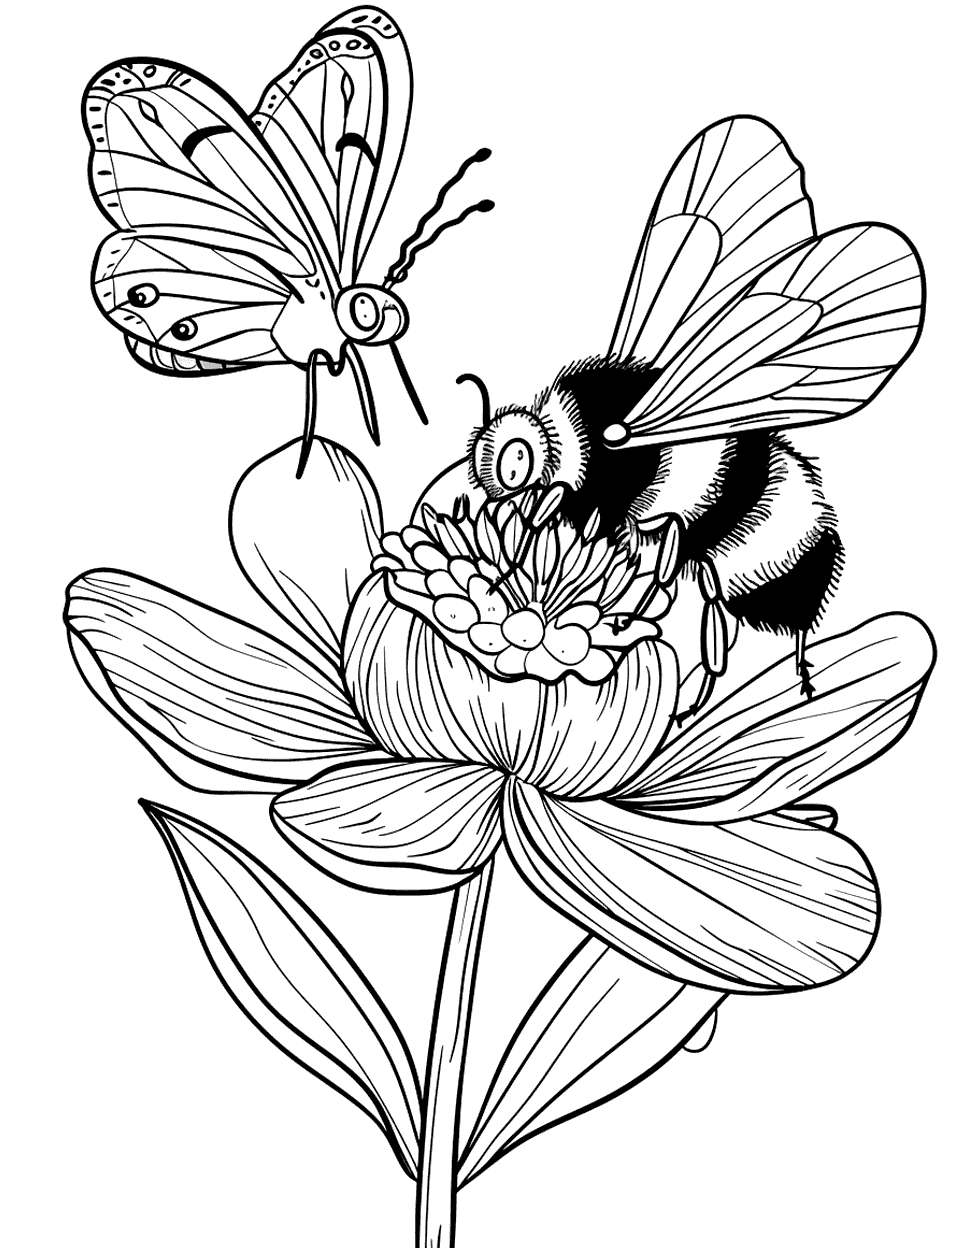 Bee and Butterfly on a Flower Coloring Page - A bee and a butterfly sharing a large flower (focus on the bee).